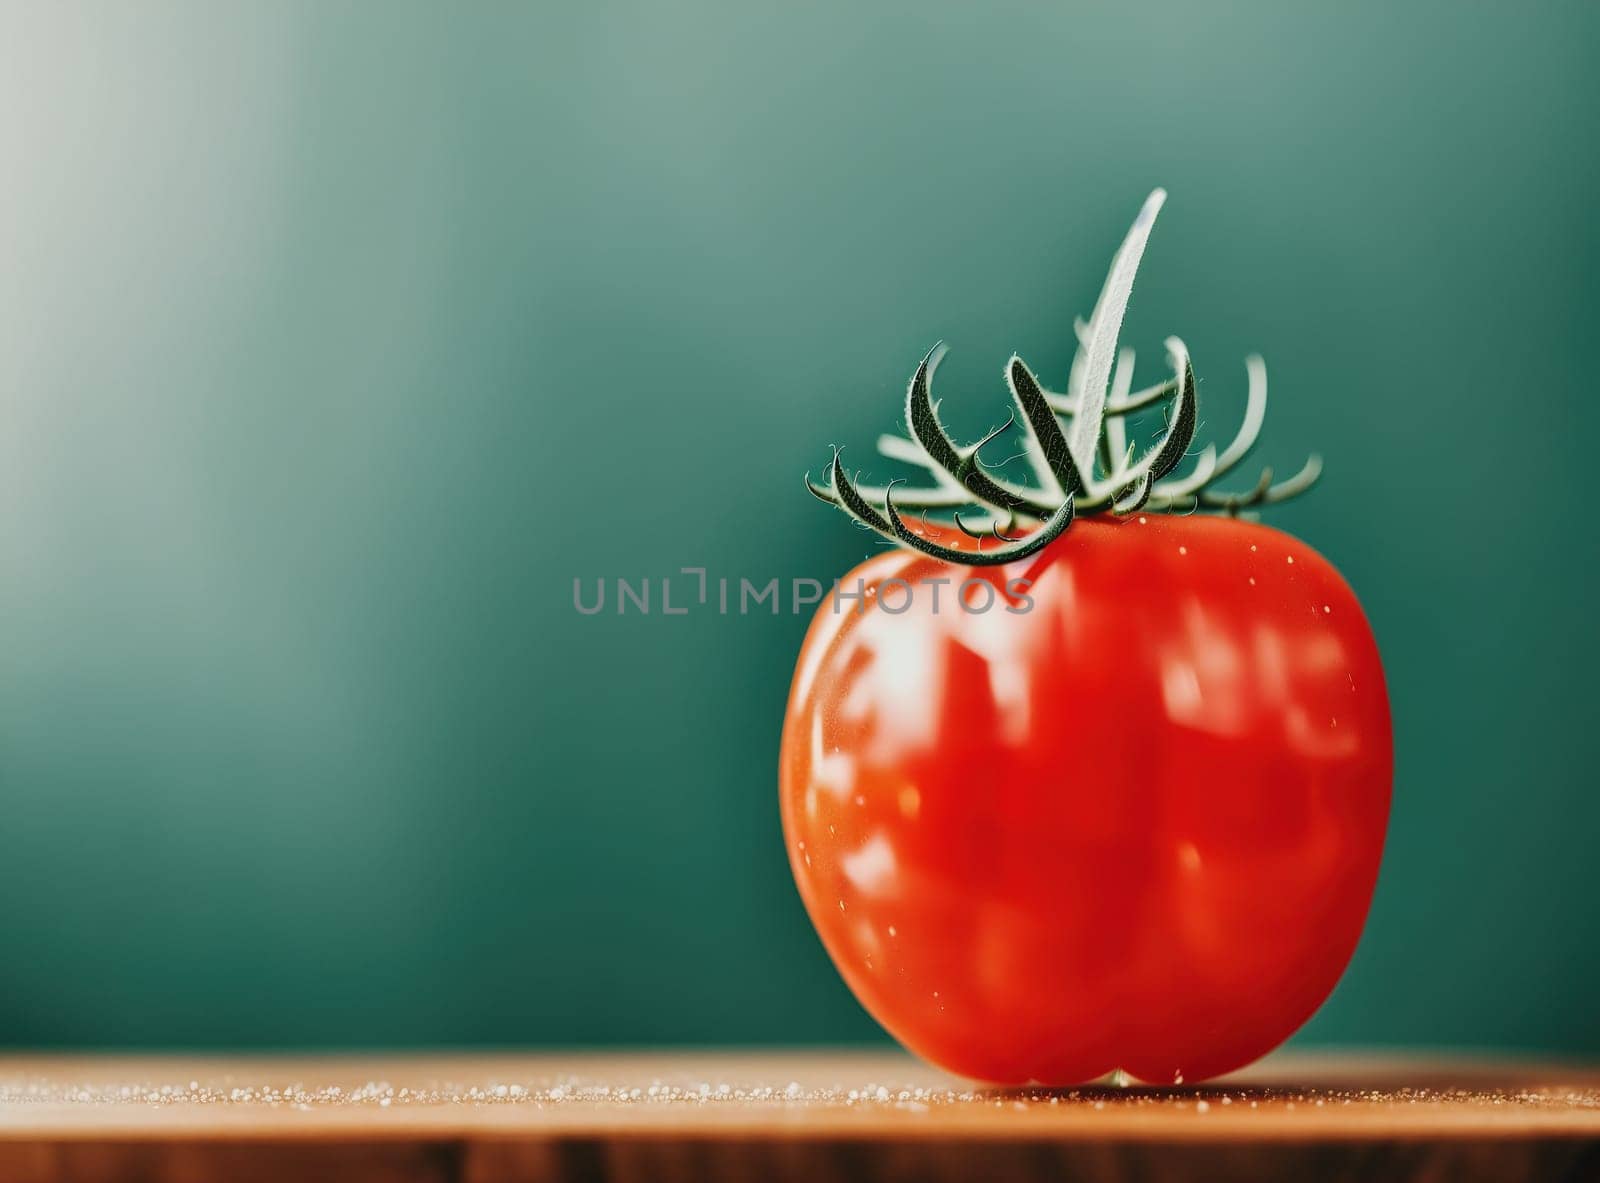 A Red Tomato on a Wooden Surface by creart